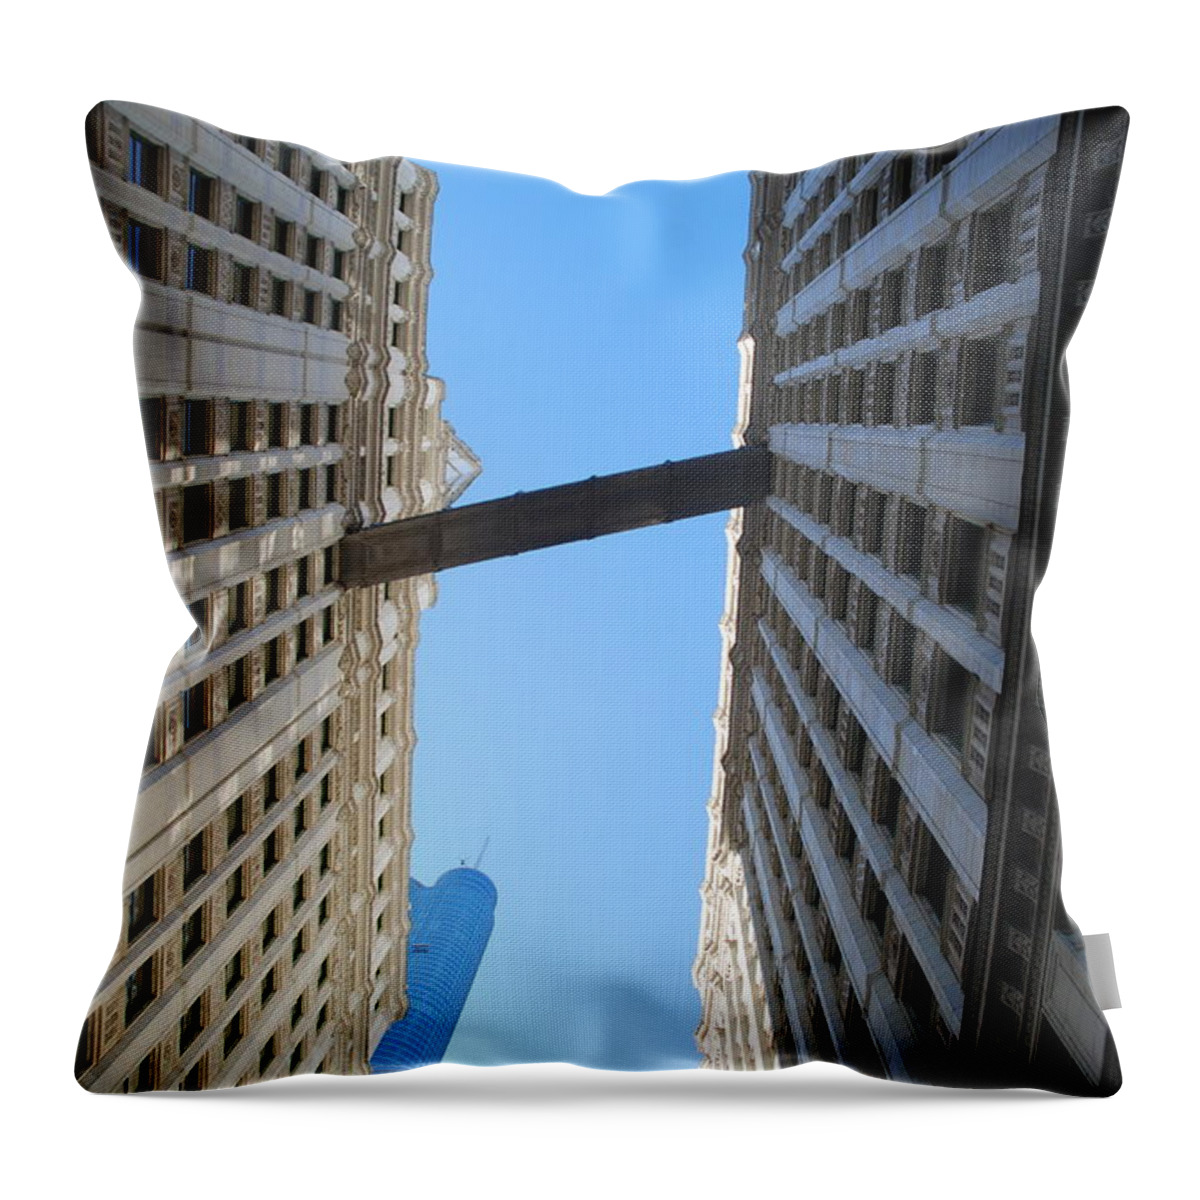 Building Throw Pillow featuring the photograph Dizzy by Richard Bryce and Family